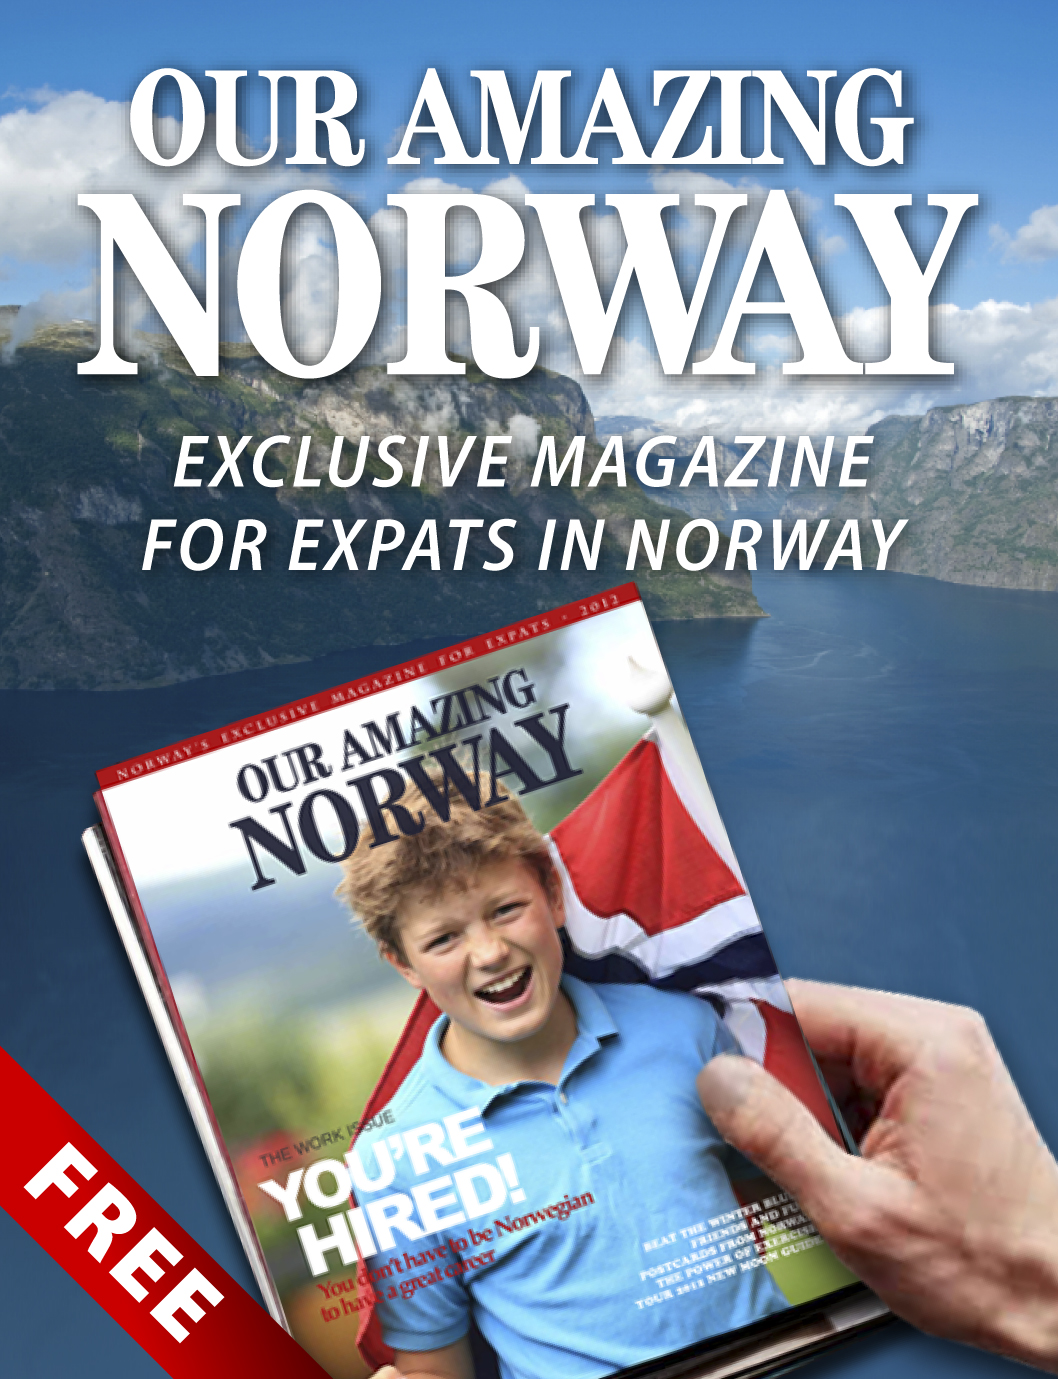 Our Amazing Norway